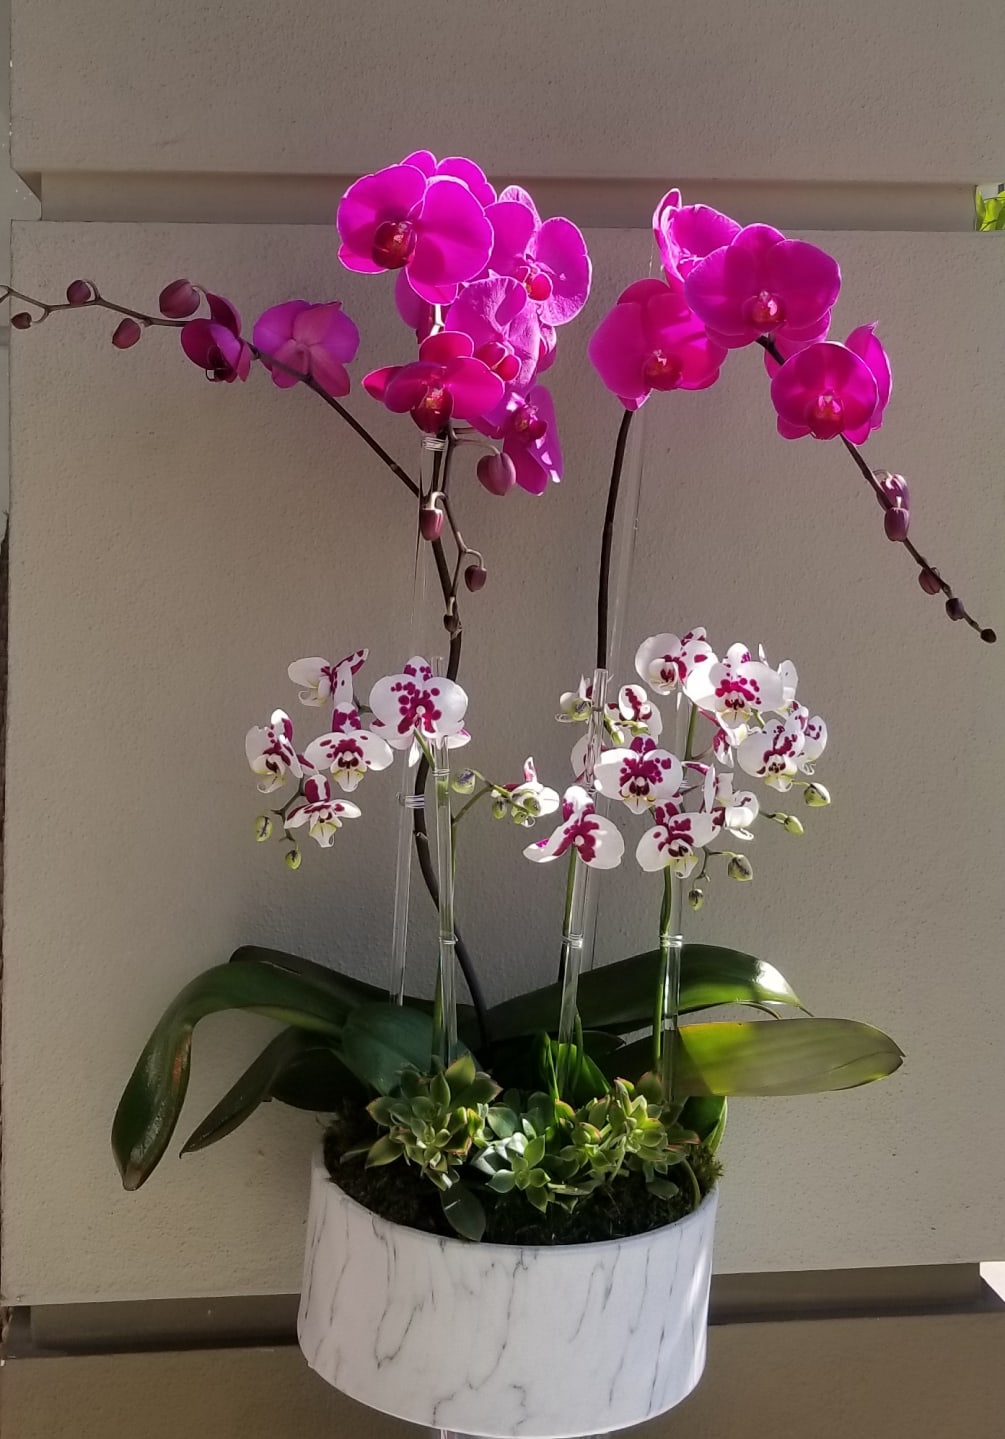 Display of large and mini purple Phalaenopsis orchids plants in a marble